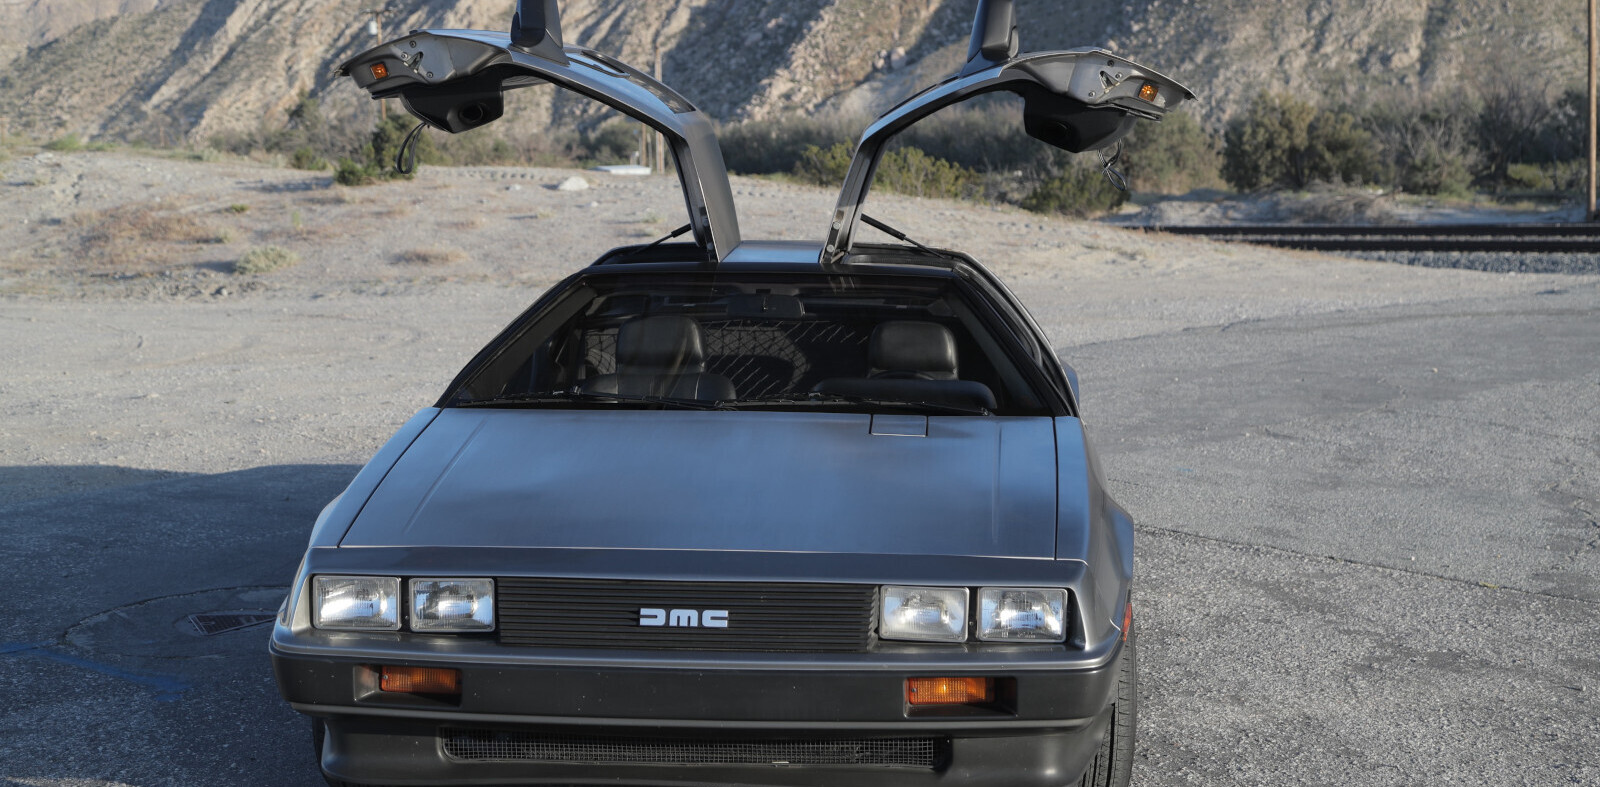 The true, cocaine-fueled story behind Back to the Future’s time-traveling DeLorean